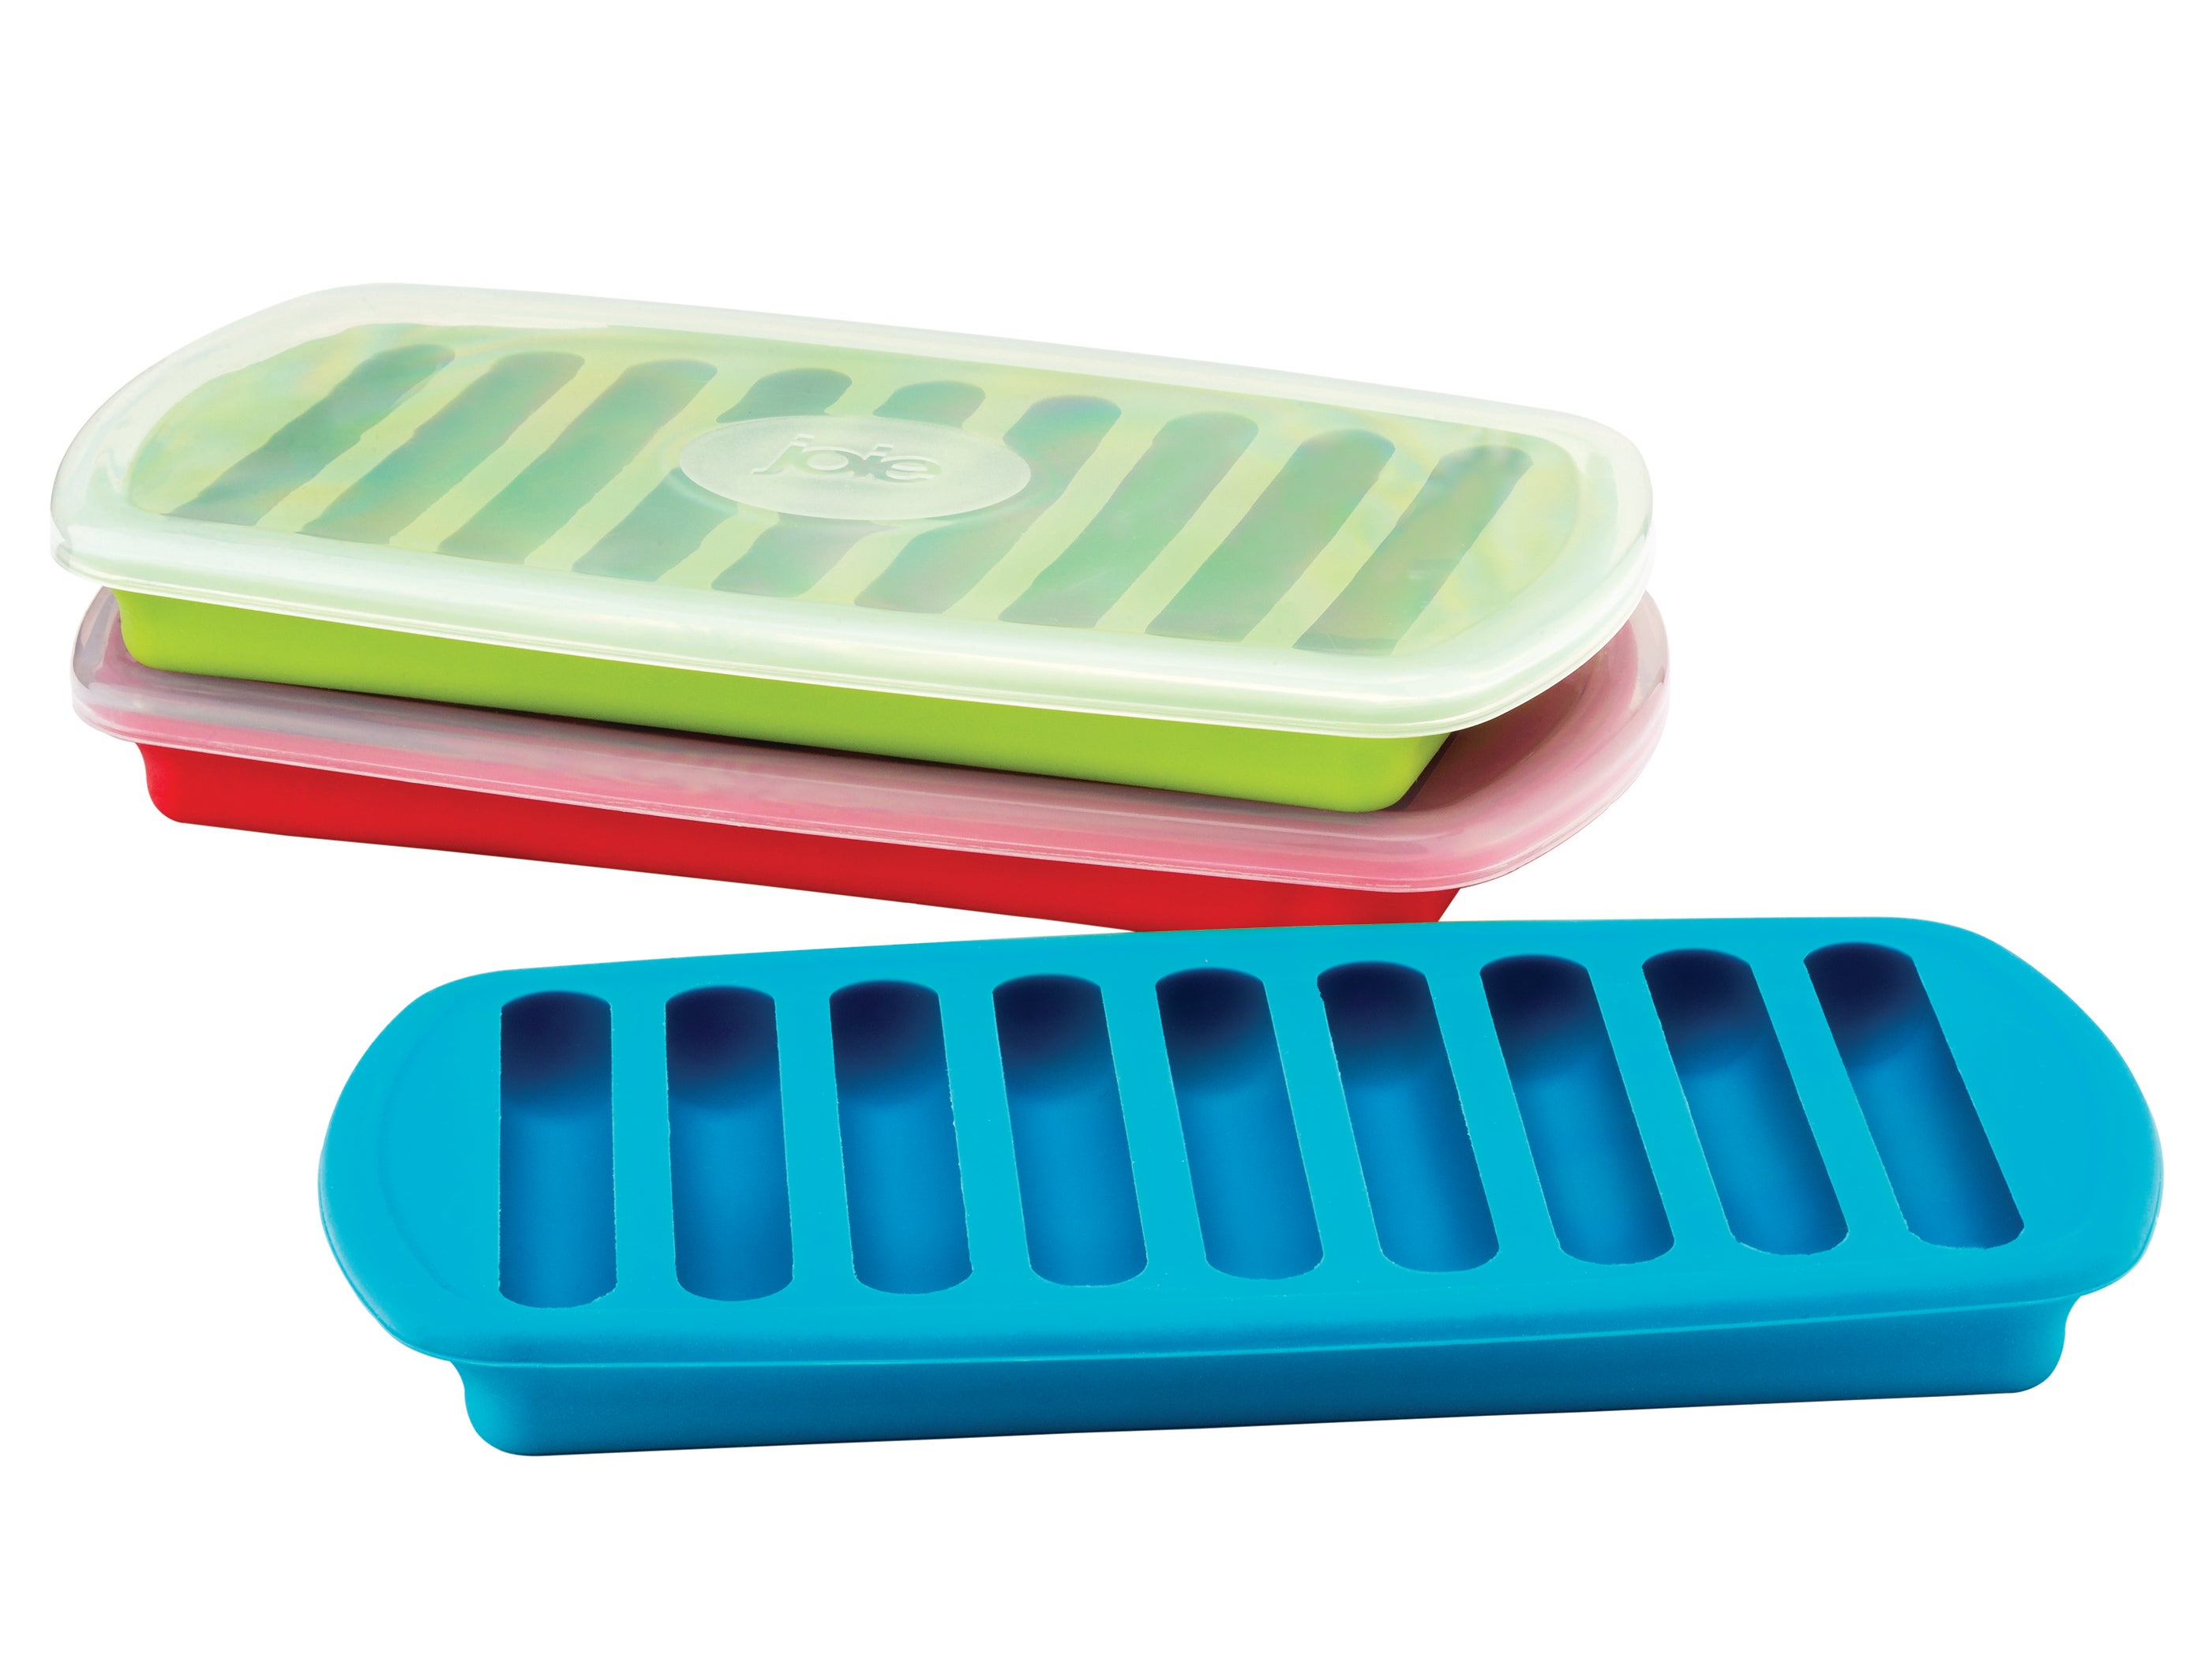 https://static.independent.co.uk/2021/05/06/10/Joie%20ice%20stick%20tray.jpg